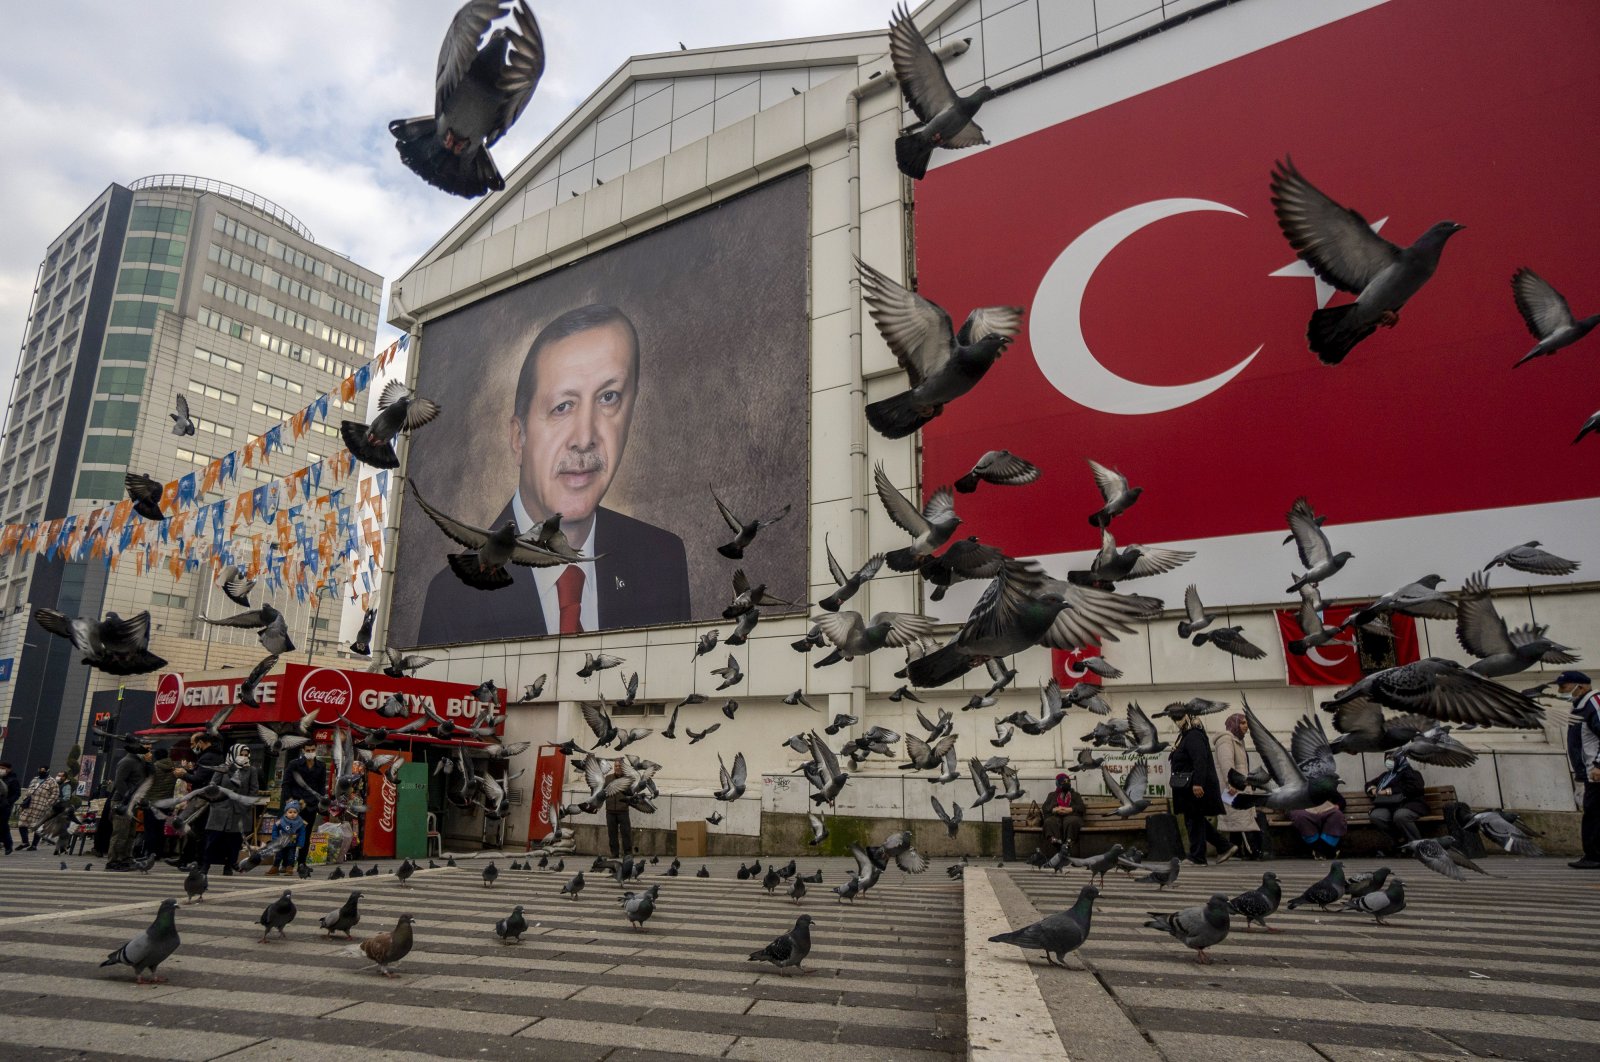 Keeping in mind that Türkiye’s "positive agenda" with the U.S. has been reduced to increasing the bilateral trade volume and the F-16 deal and the country’s EU membership bid having been frozen for a long time, the relations between Türkiye and the West will be tested over the next months. (Getty Images Photo)